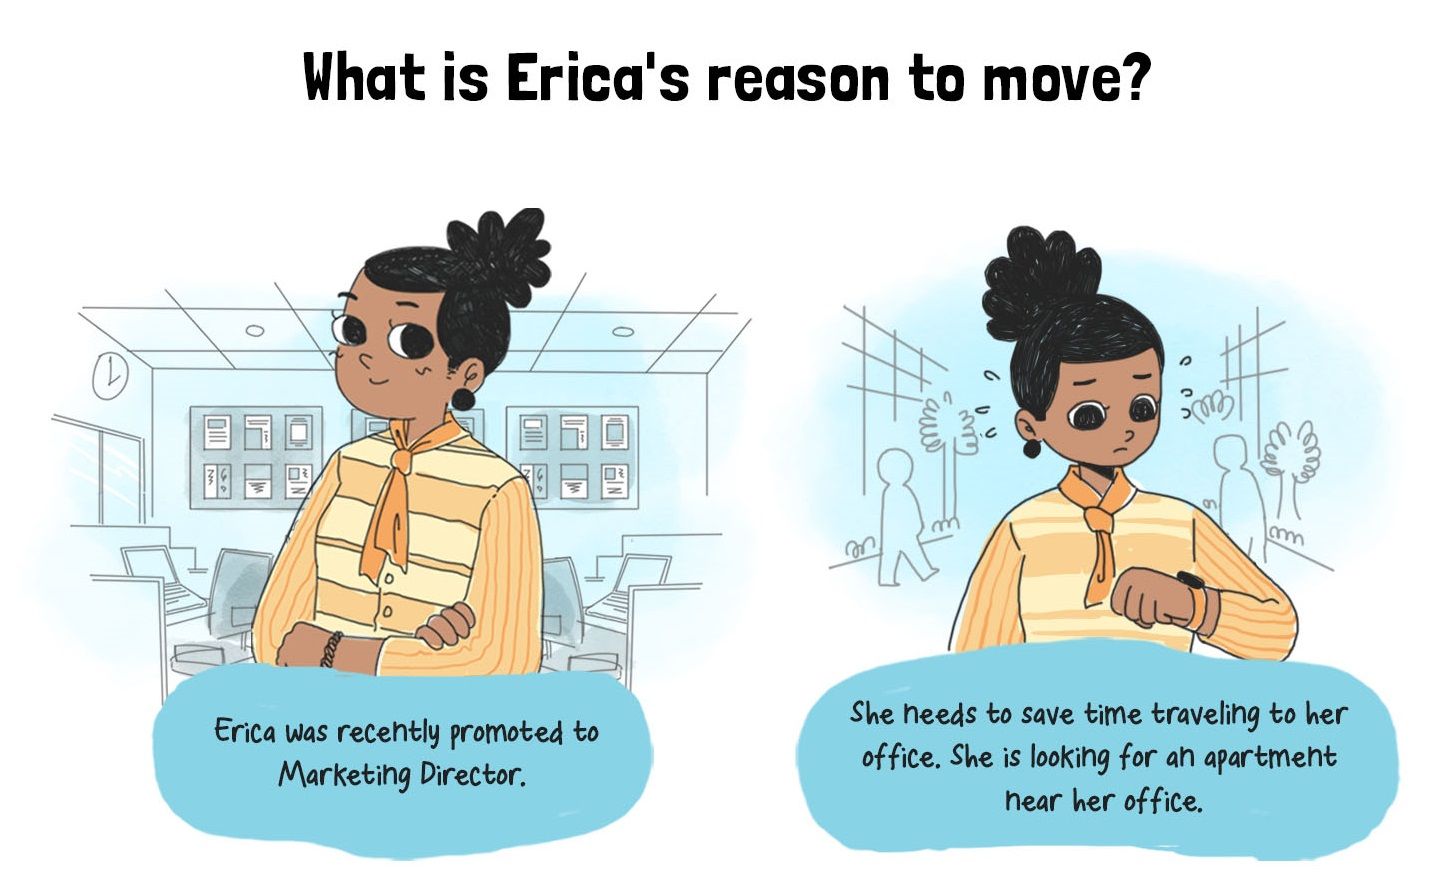 	What is erica’s reason to move? Erica on left who was recently promoted to marketing director and erica on right who needs to save time traveling to her office which is why she is looking for an apartment near her office.